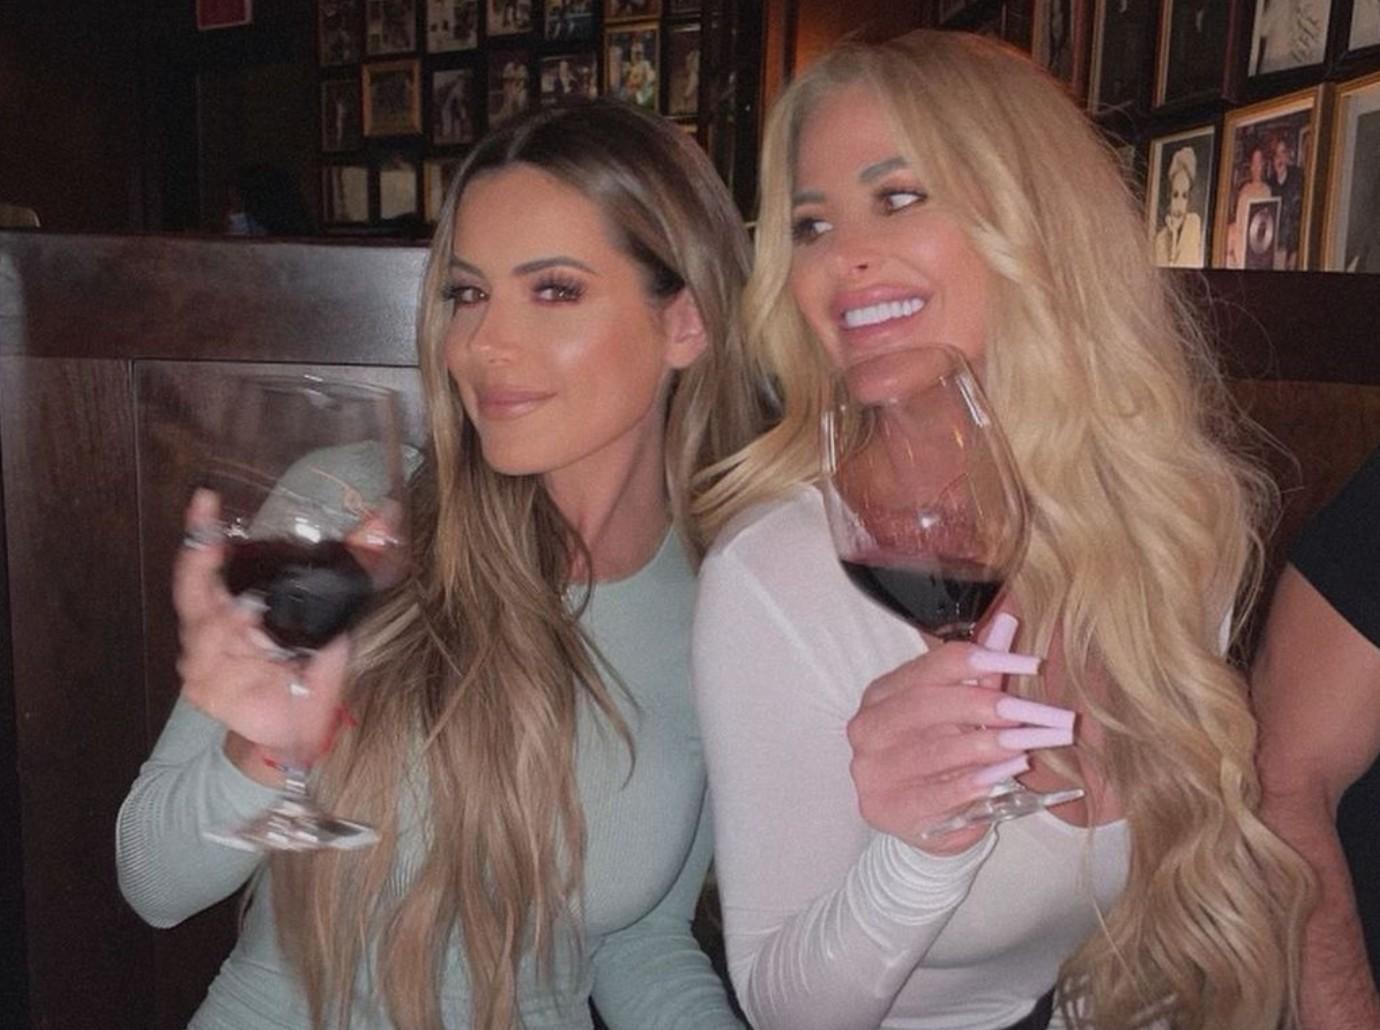 PIC: Kim Zolciak Accused of Selling Used LV Bag as “Brand New